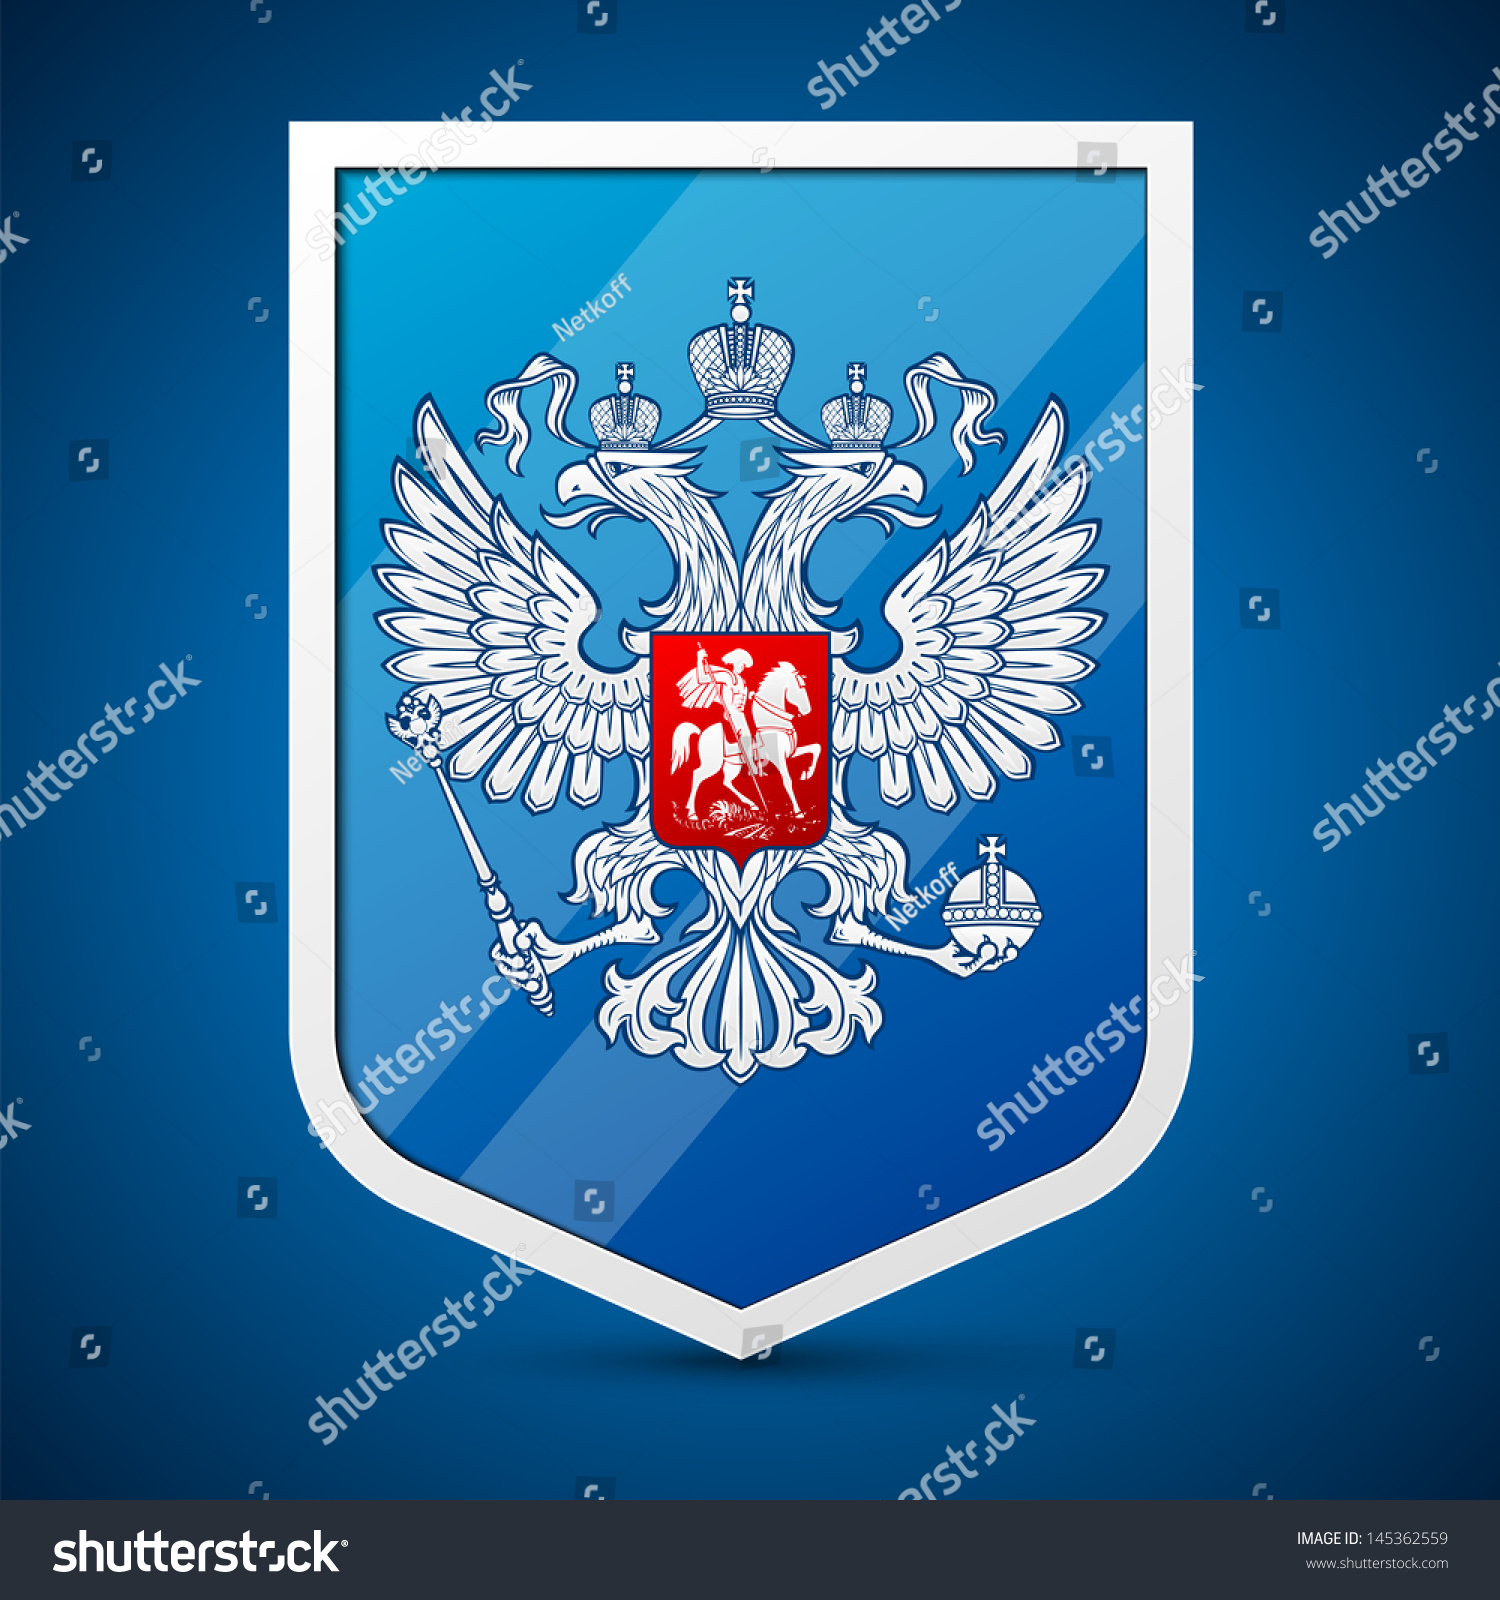 Coat Of Arms Of The Russian Federation Stock Vector Illustration 145362559 Shutterstock